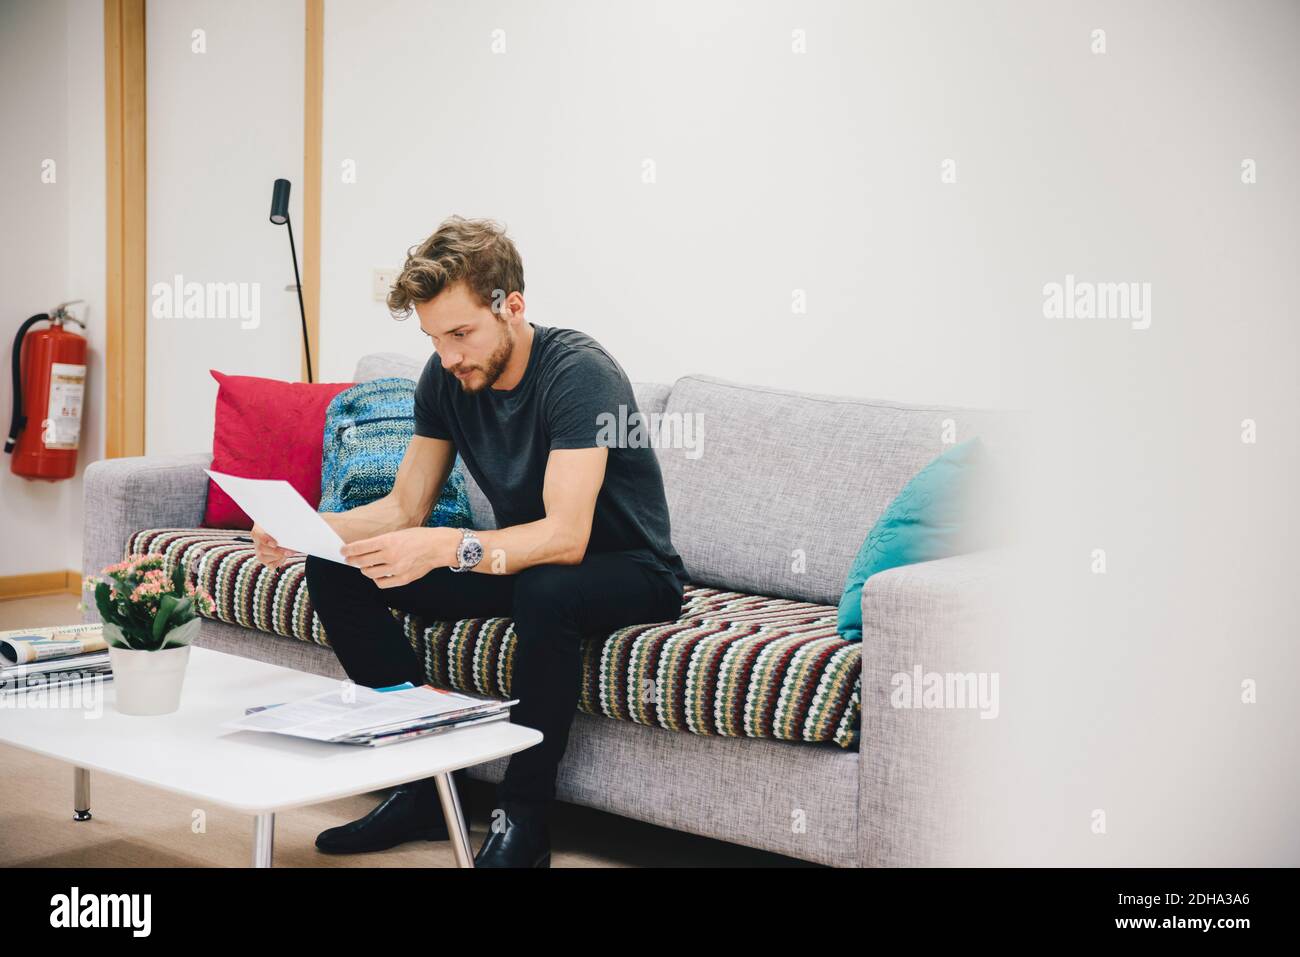 Young male patient reading document while sitting on sofa at hospital Stock Photo